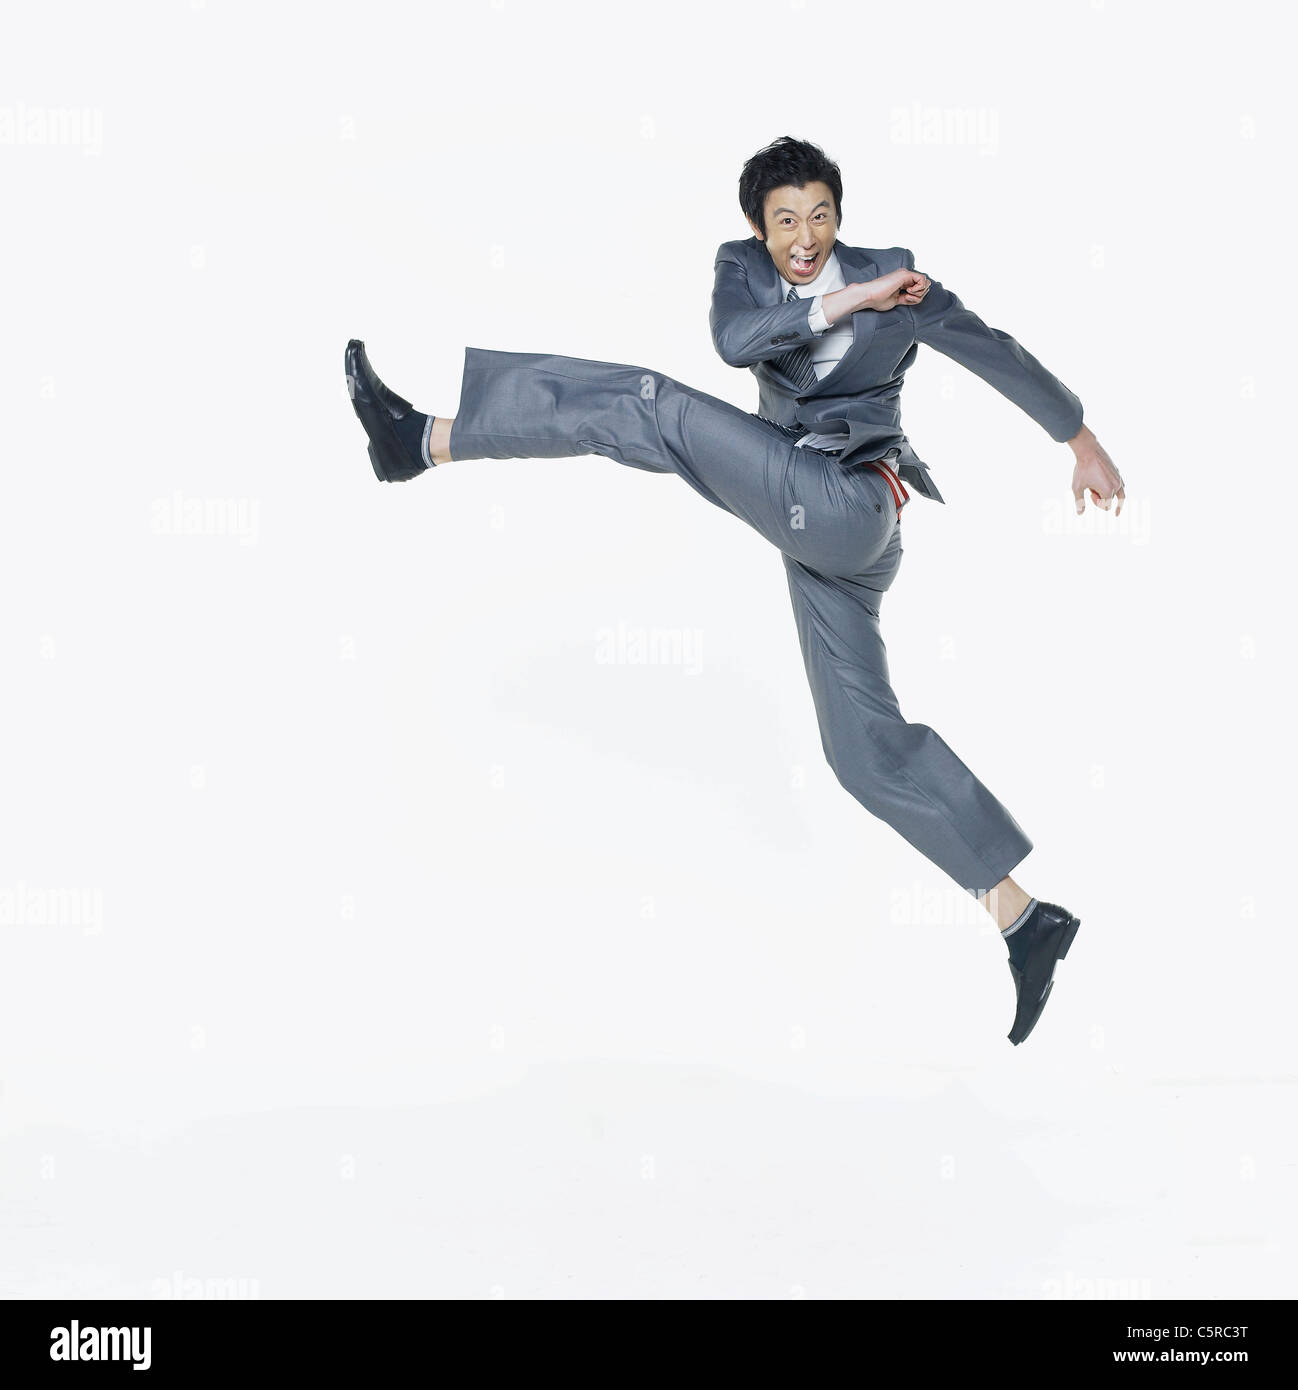 A man jumping with joy Stock Photo